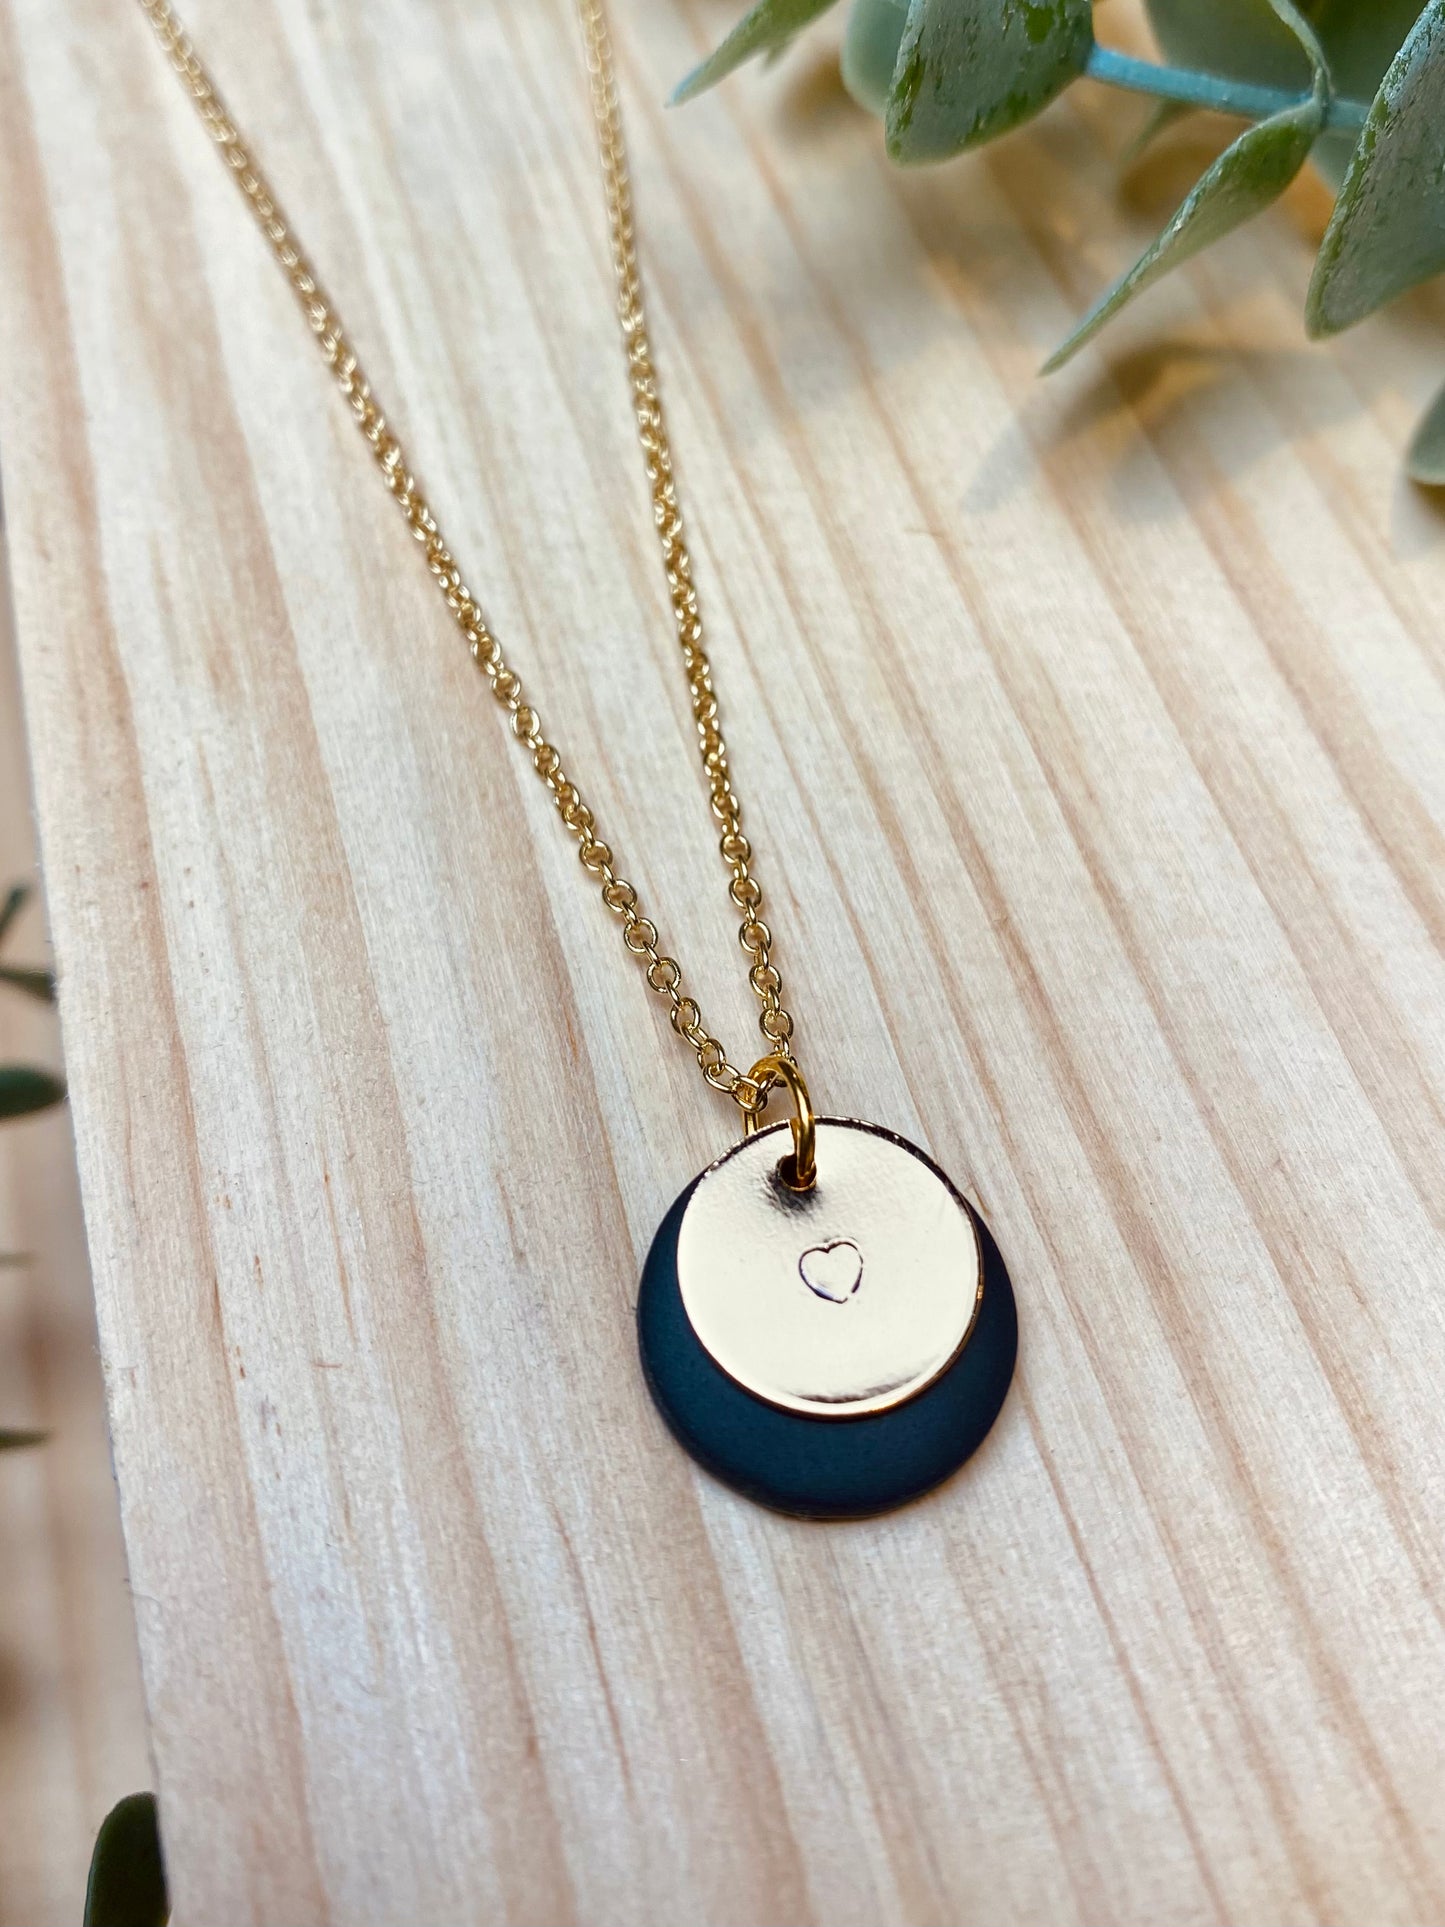 Black Circle Necklace With Gold Charm